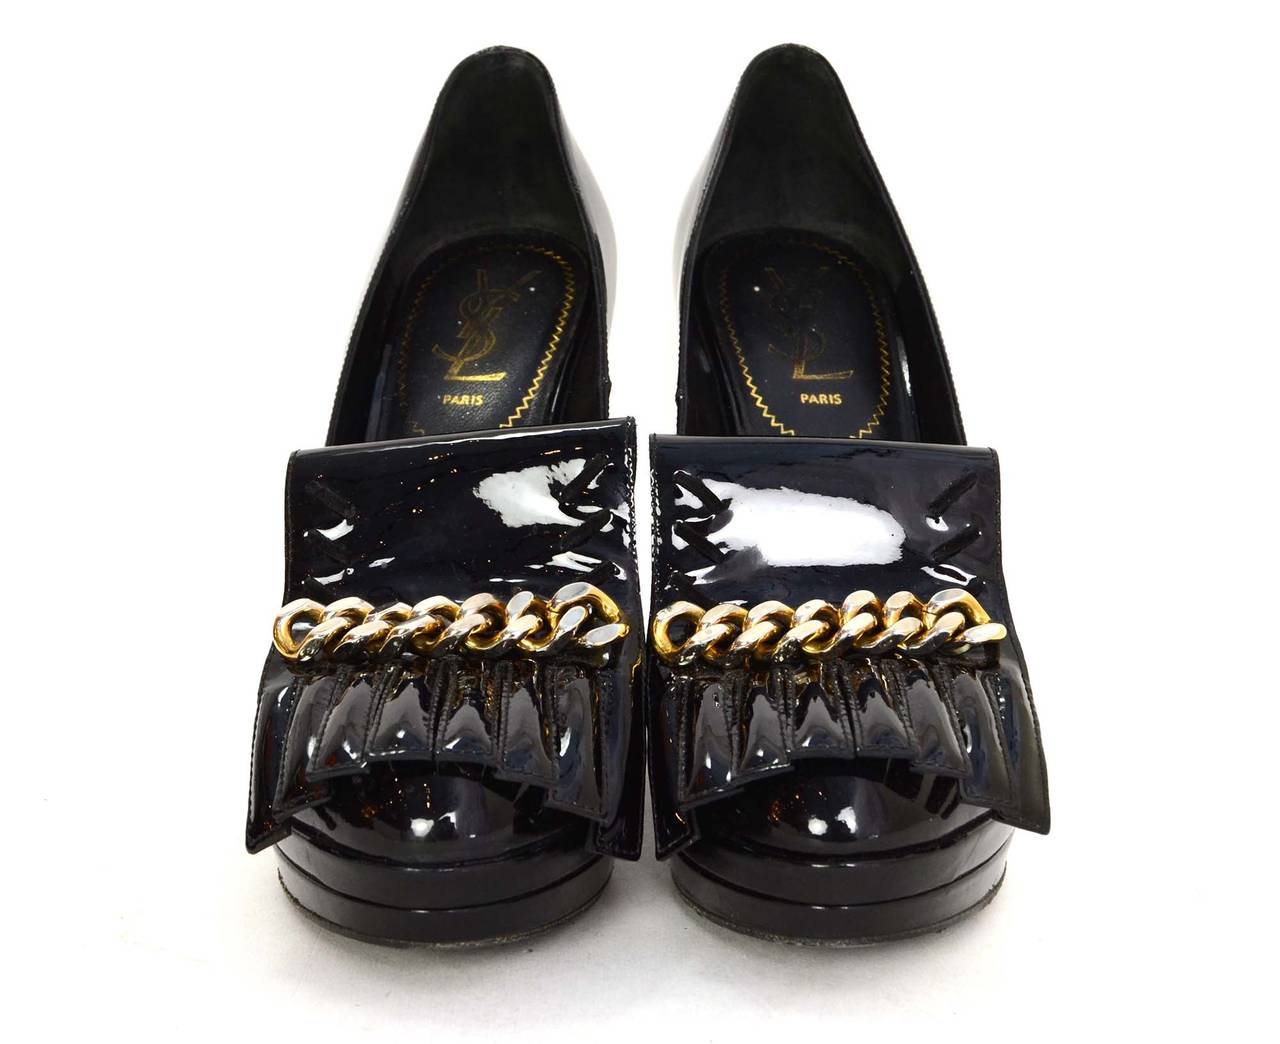 Yves Saint Laurent YSL Black Patent Wedges 
Features fringe and goldtone chain at toe
Made in: Italy
Color: Black and goldtone
Composition: Patent leather and metal
Sole Stamp: Yves Saint Laurent Made in Italy 37 1/2
Closure/opening: Slide